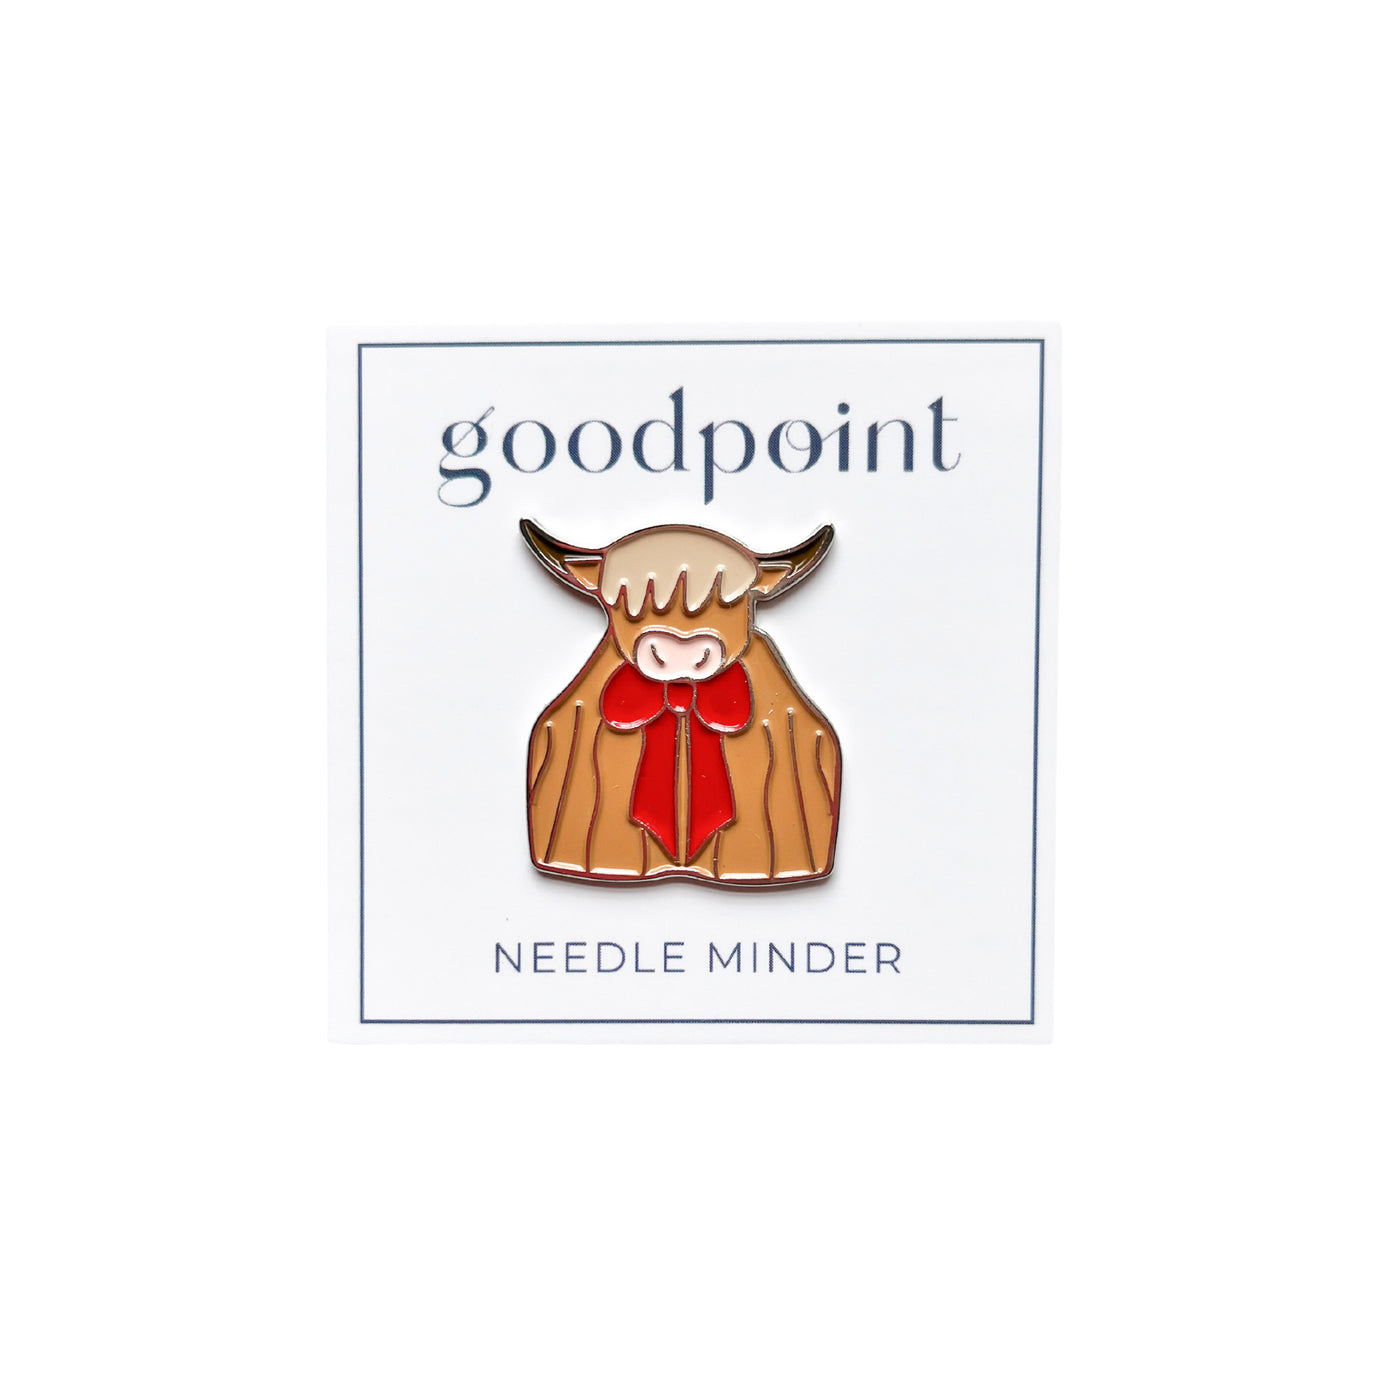 white card stock with the goodpoint logo holds an enamel needle minder shaped like a Highland Cow wearing a red bow